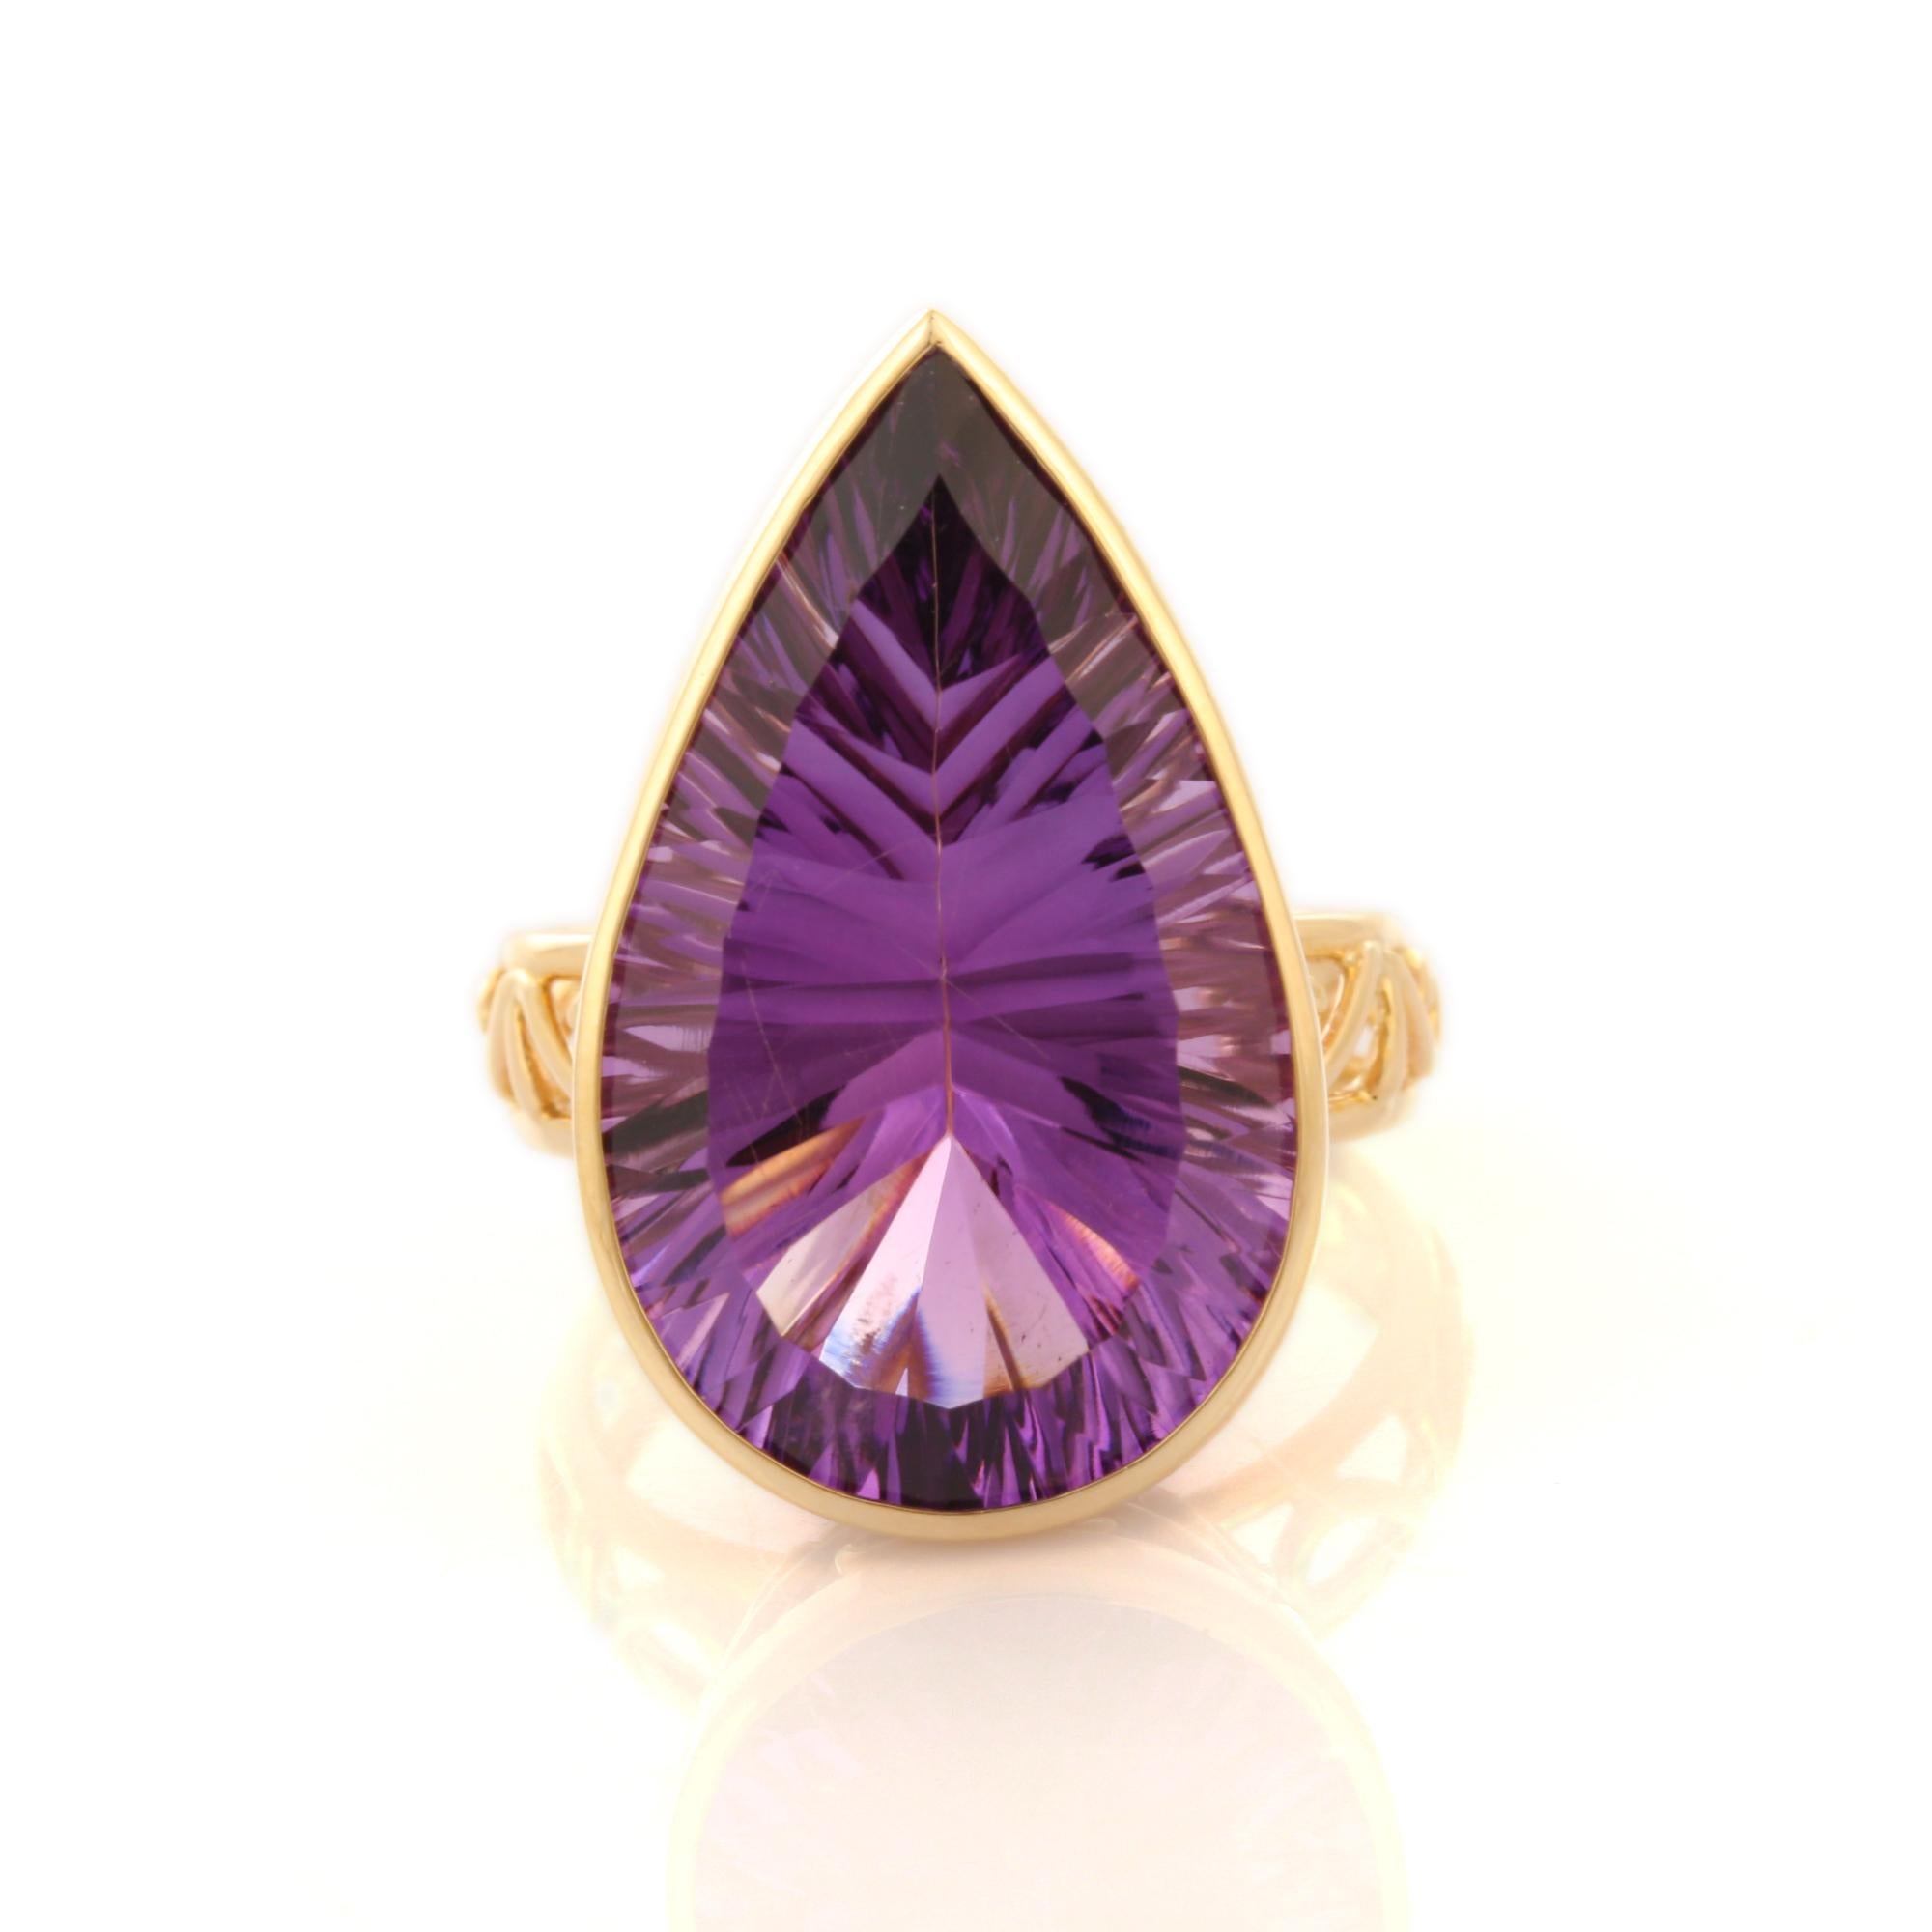 For Sale:  18.2 Carat Pear Cut Amethyst Cocktail Ring in 14K Yellow Gold